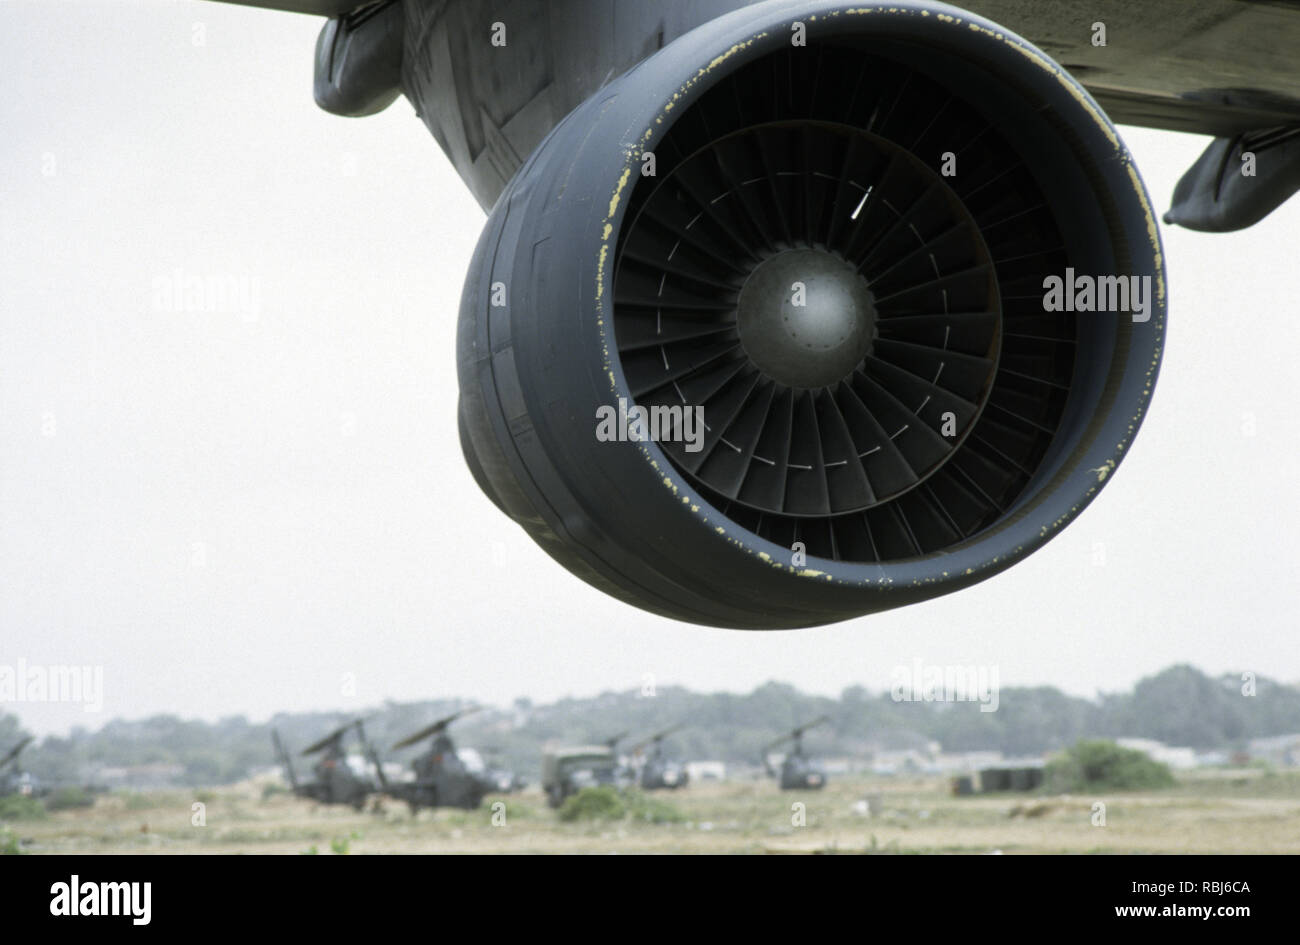 10th October 1993 One of the four big engines of a USAF Lockheed Galaxy C5 military transport jet of Air Mobility Command, parked at Mogadishu Airport in Somalia. In the background are Cobra attack helicopters and a medical Huey helicopter. Stock Photo